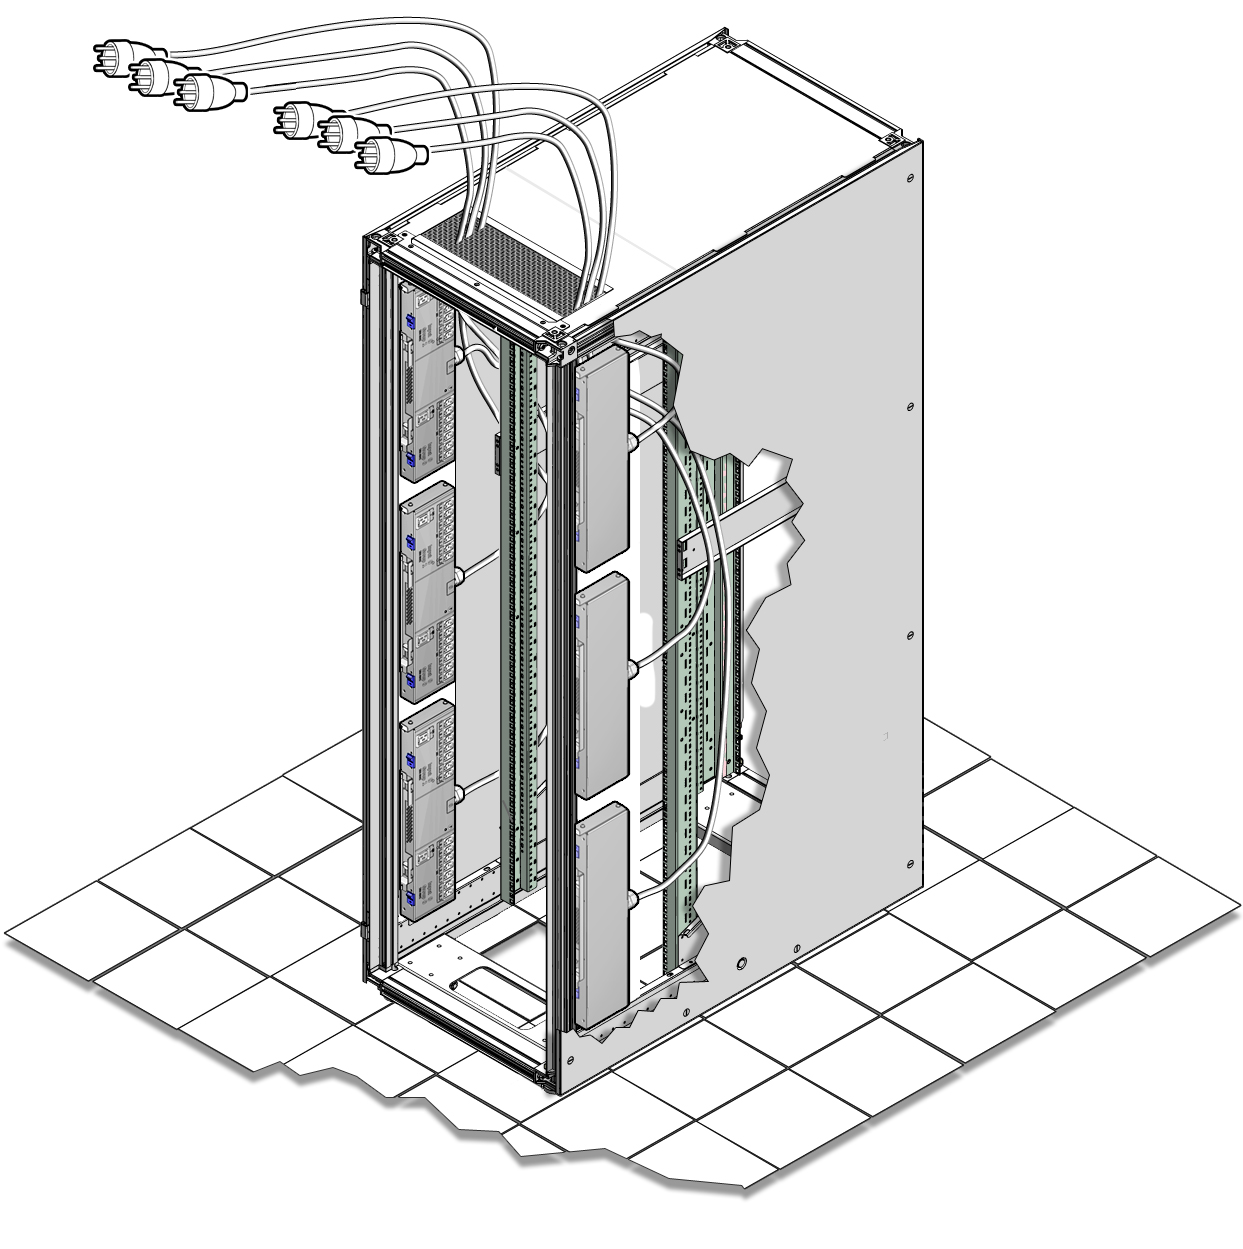 image:Figure showing how to route the power input lead cord up                                 through the top window of the rack.